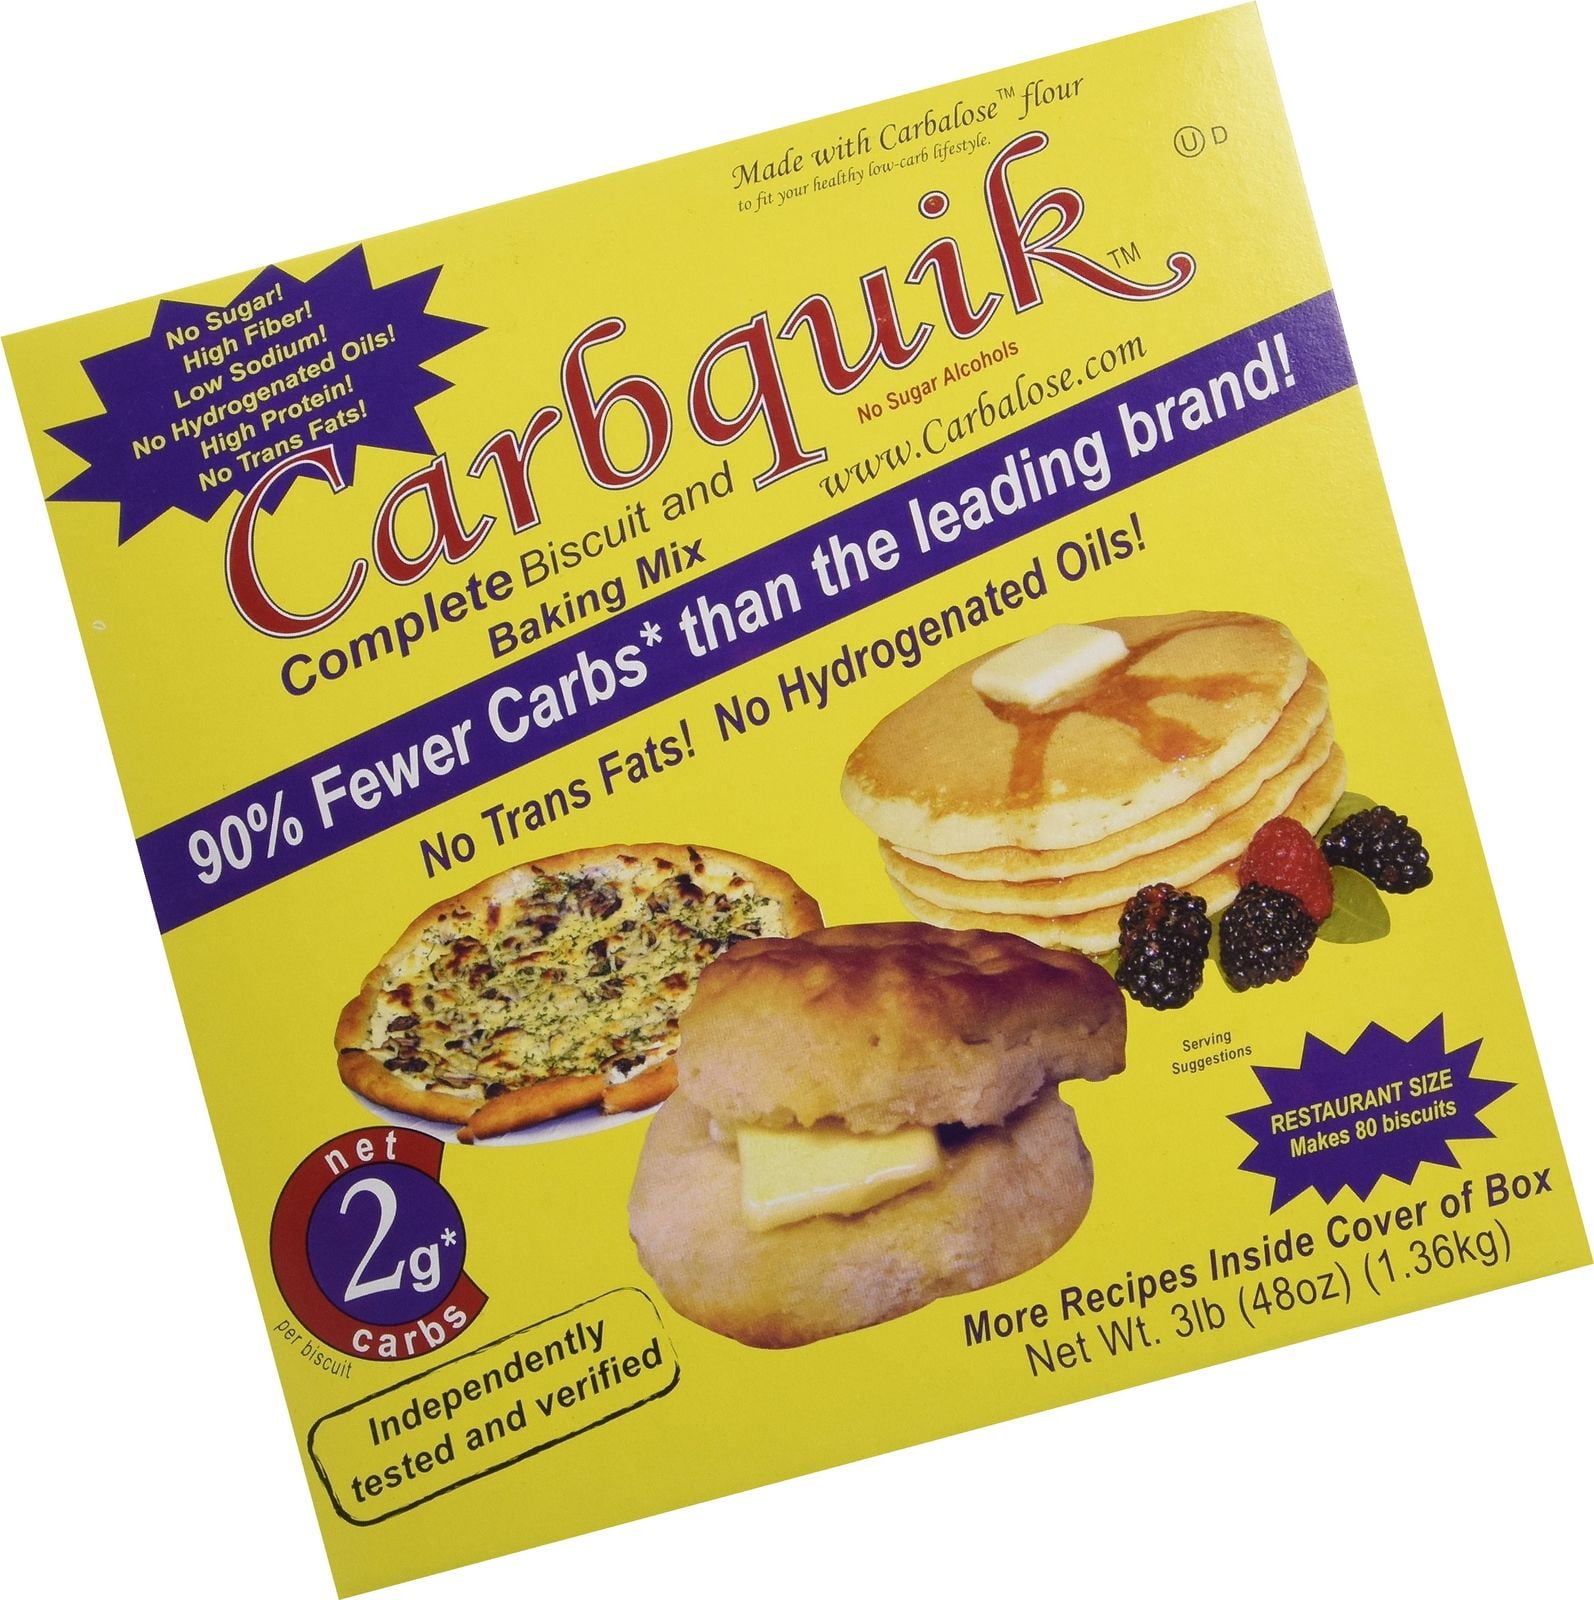 15 Ideas for Carbquik Baking Biscuit Mix – Easy Recipes To Make at Home